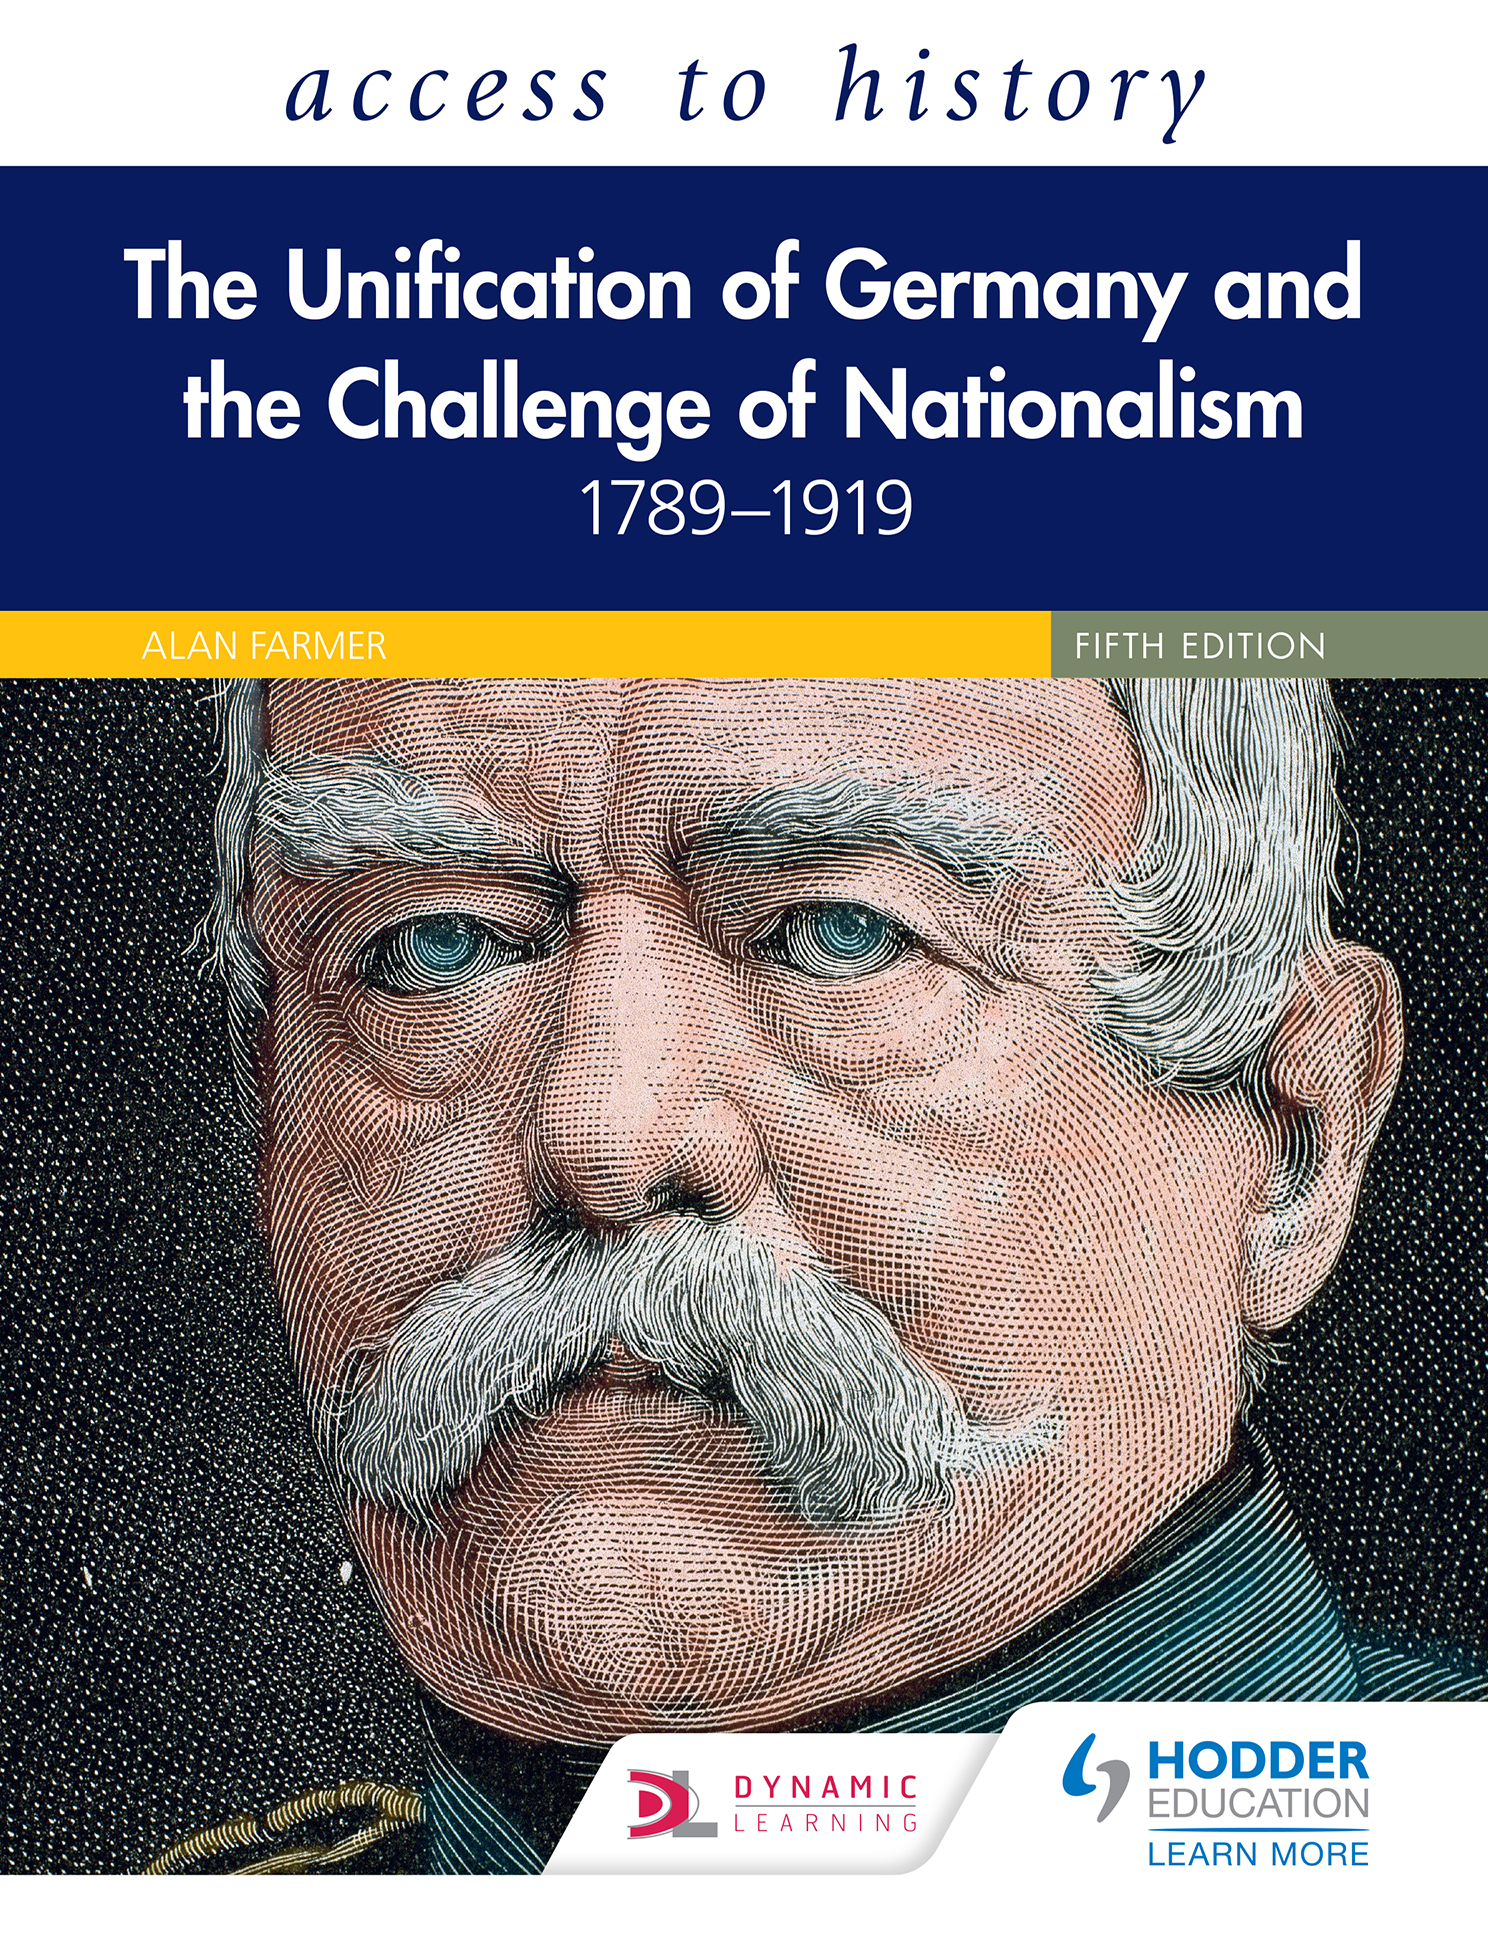 ATH: The Unification of Germany 1789-1919 Fifth Edition